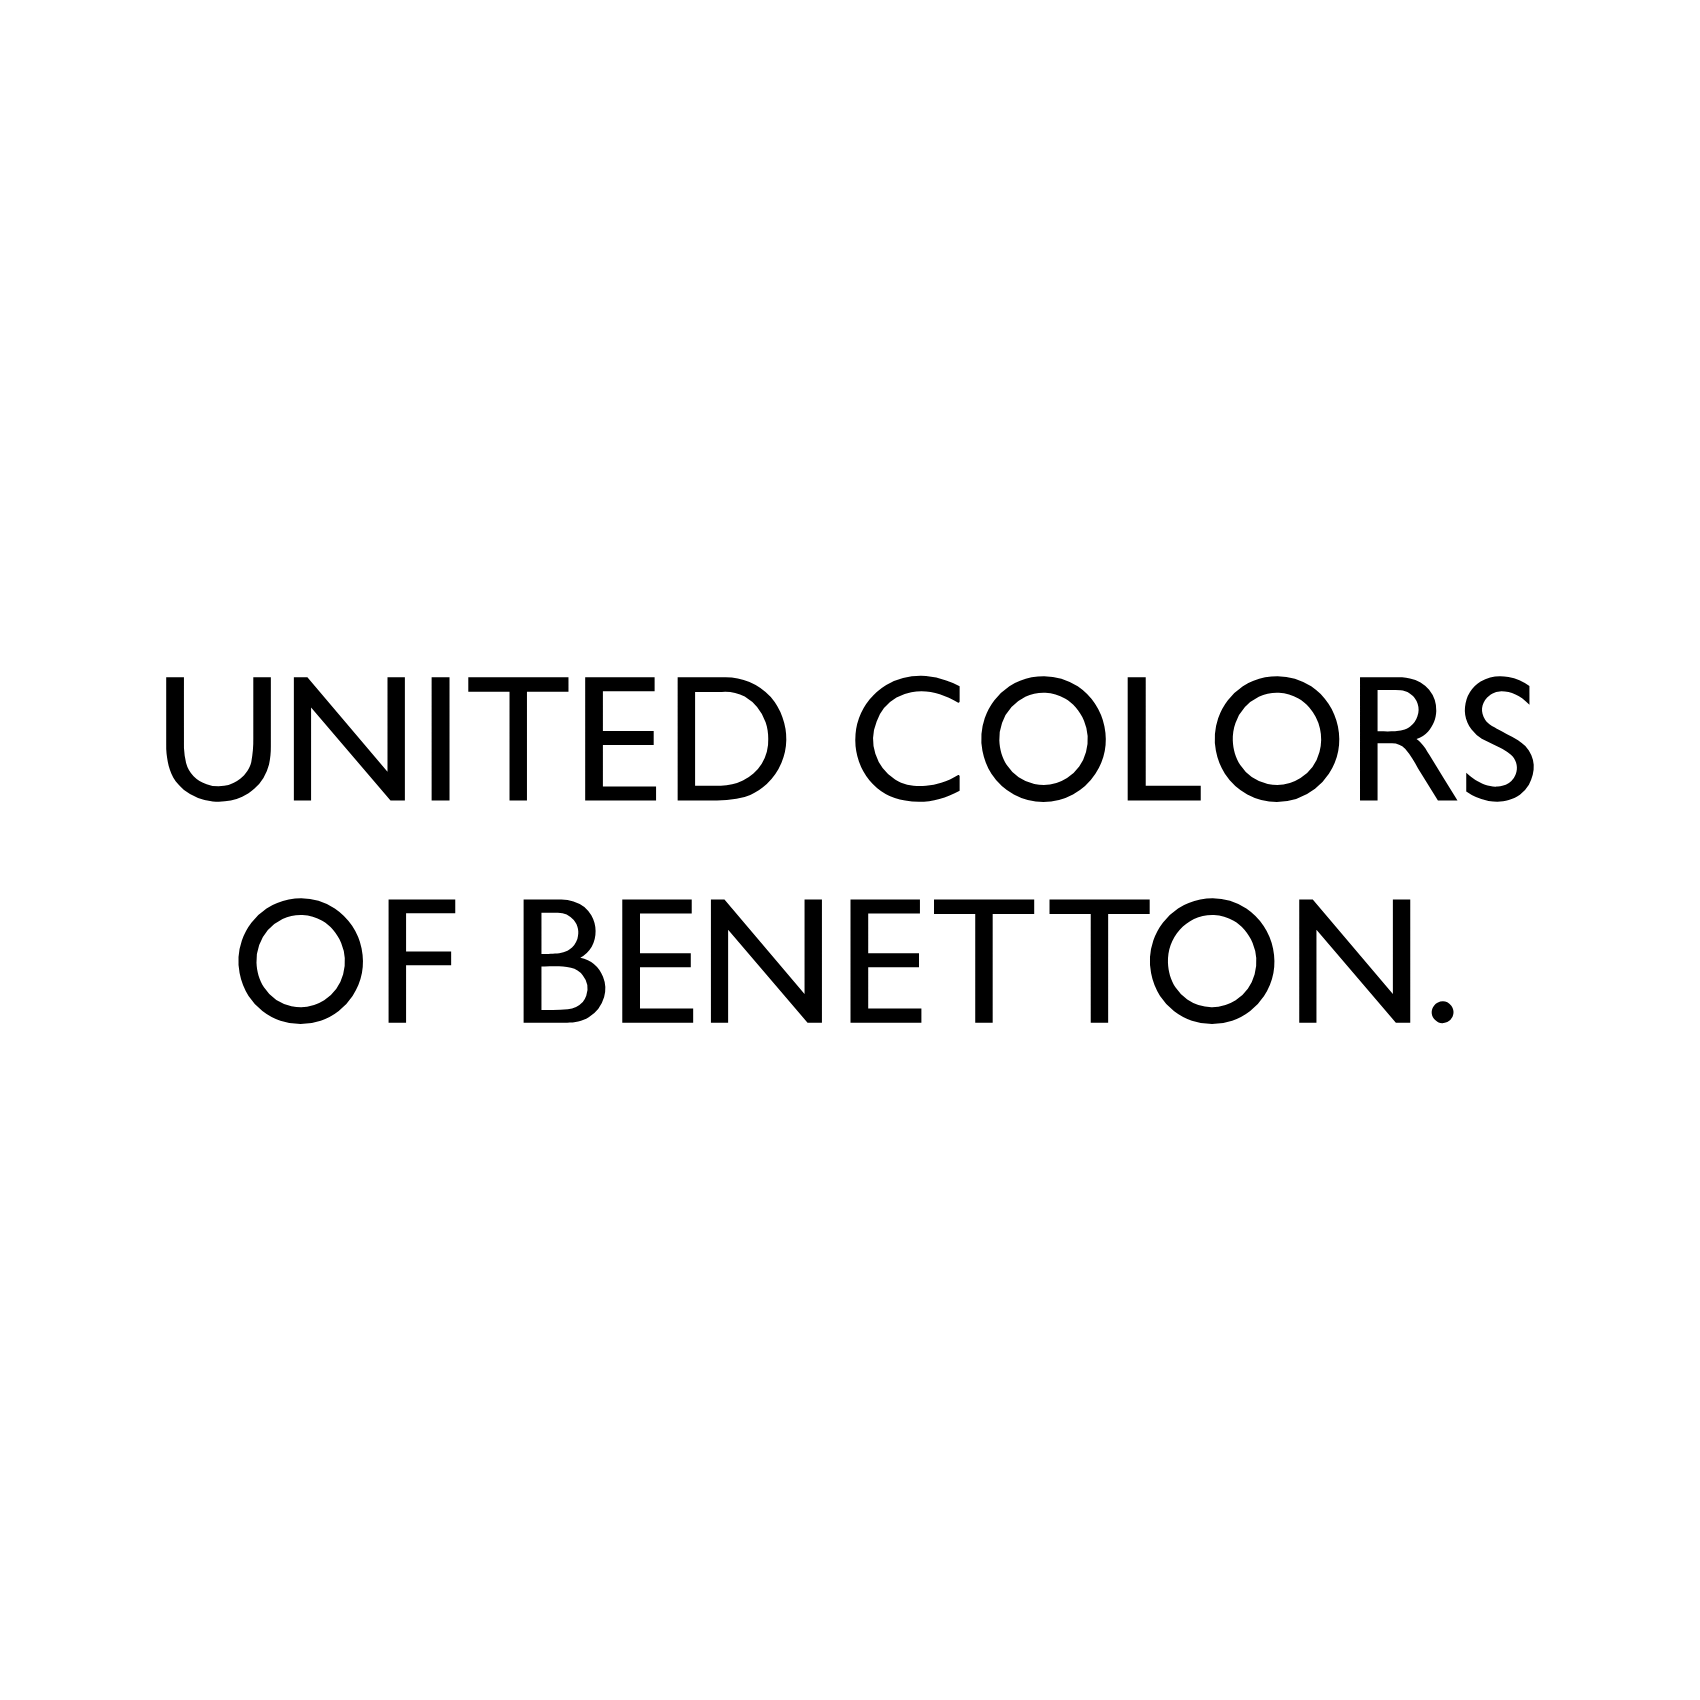 United Colors of Benetton Gift Voucher-Rs.2000 : Amazon.in: Gift Cards